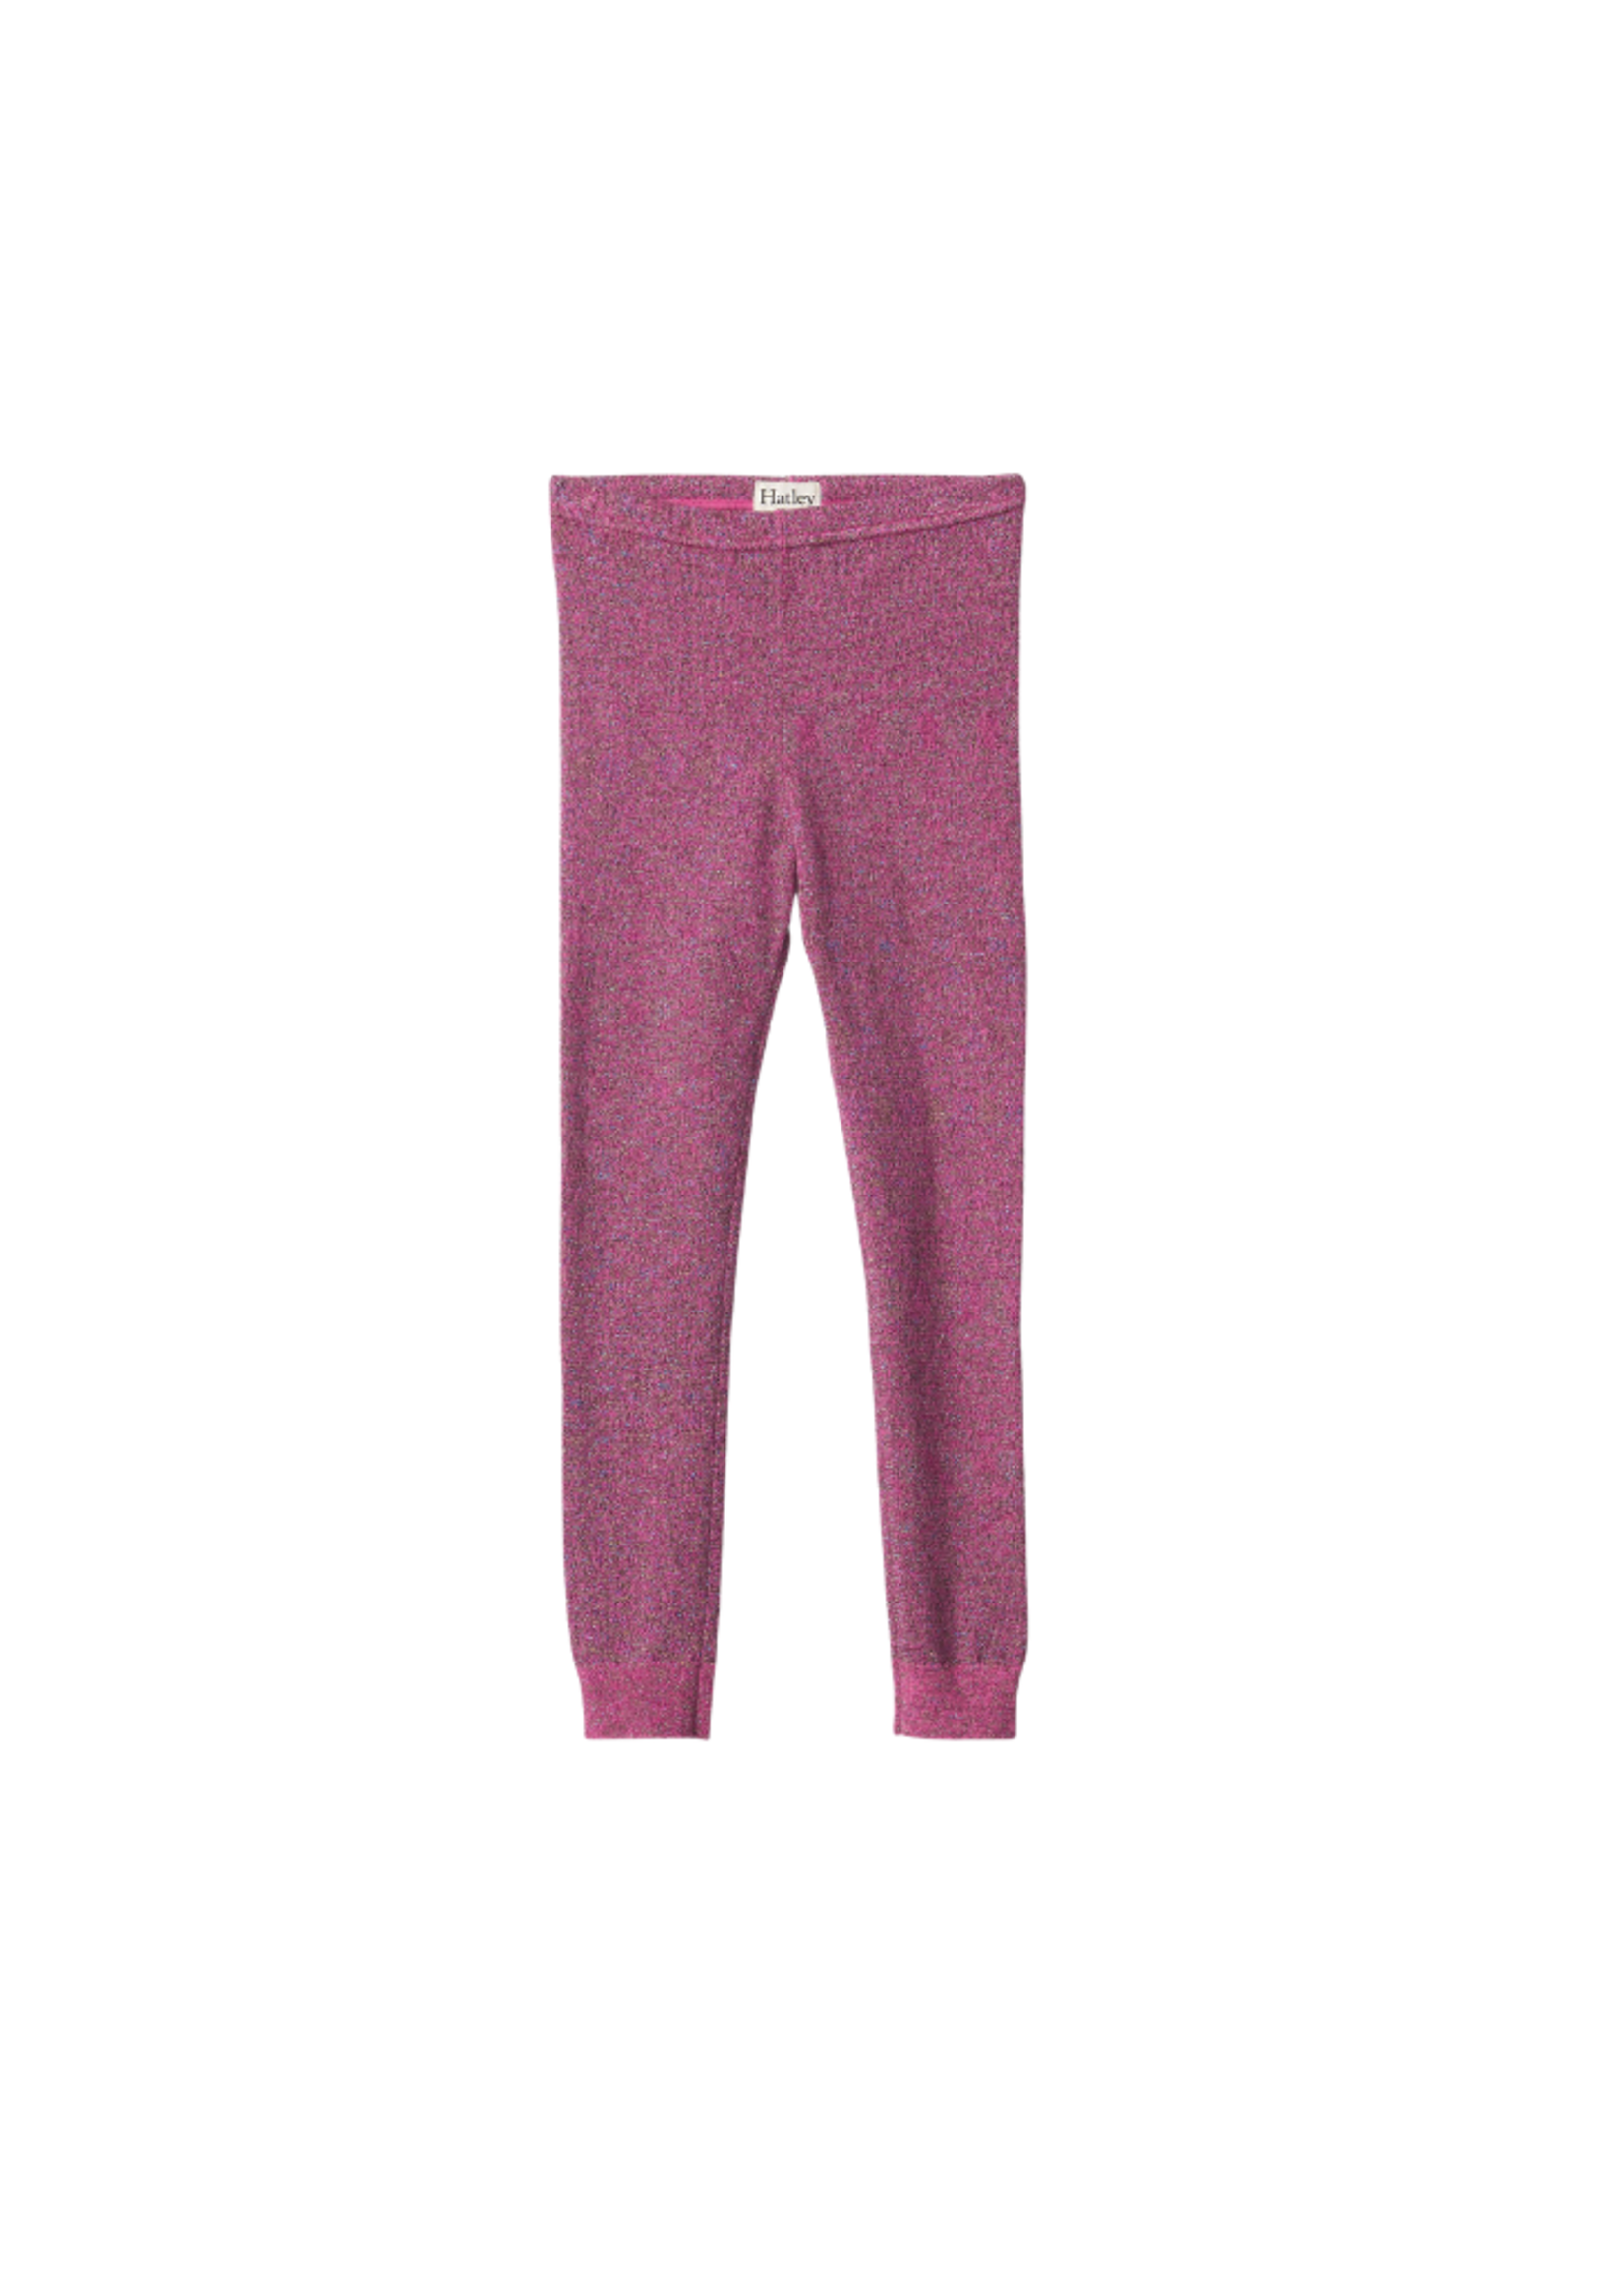 Hatley Pink Glitter Cable Knit Leggings